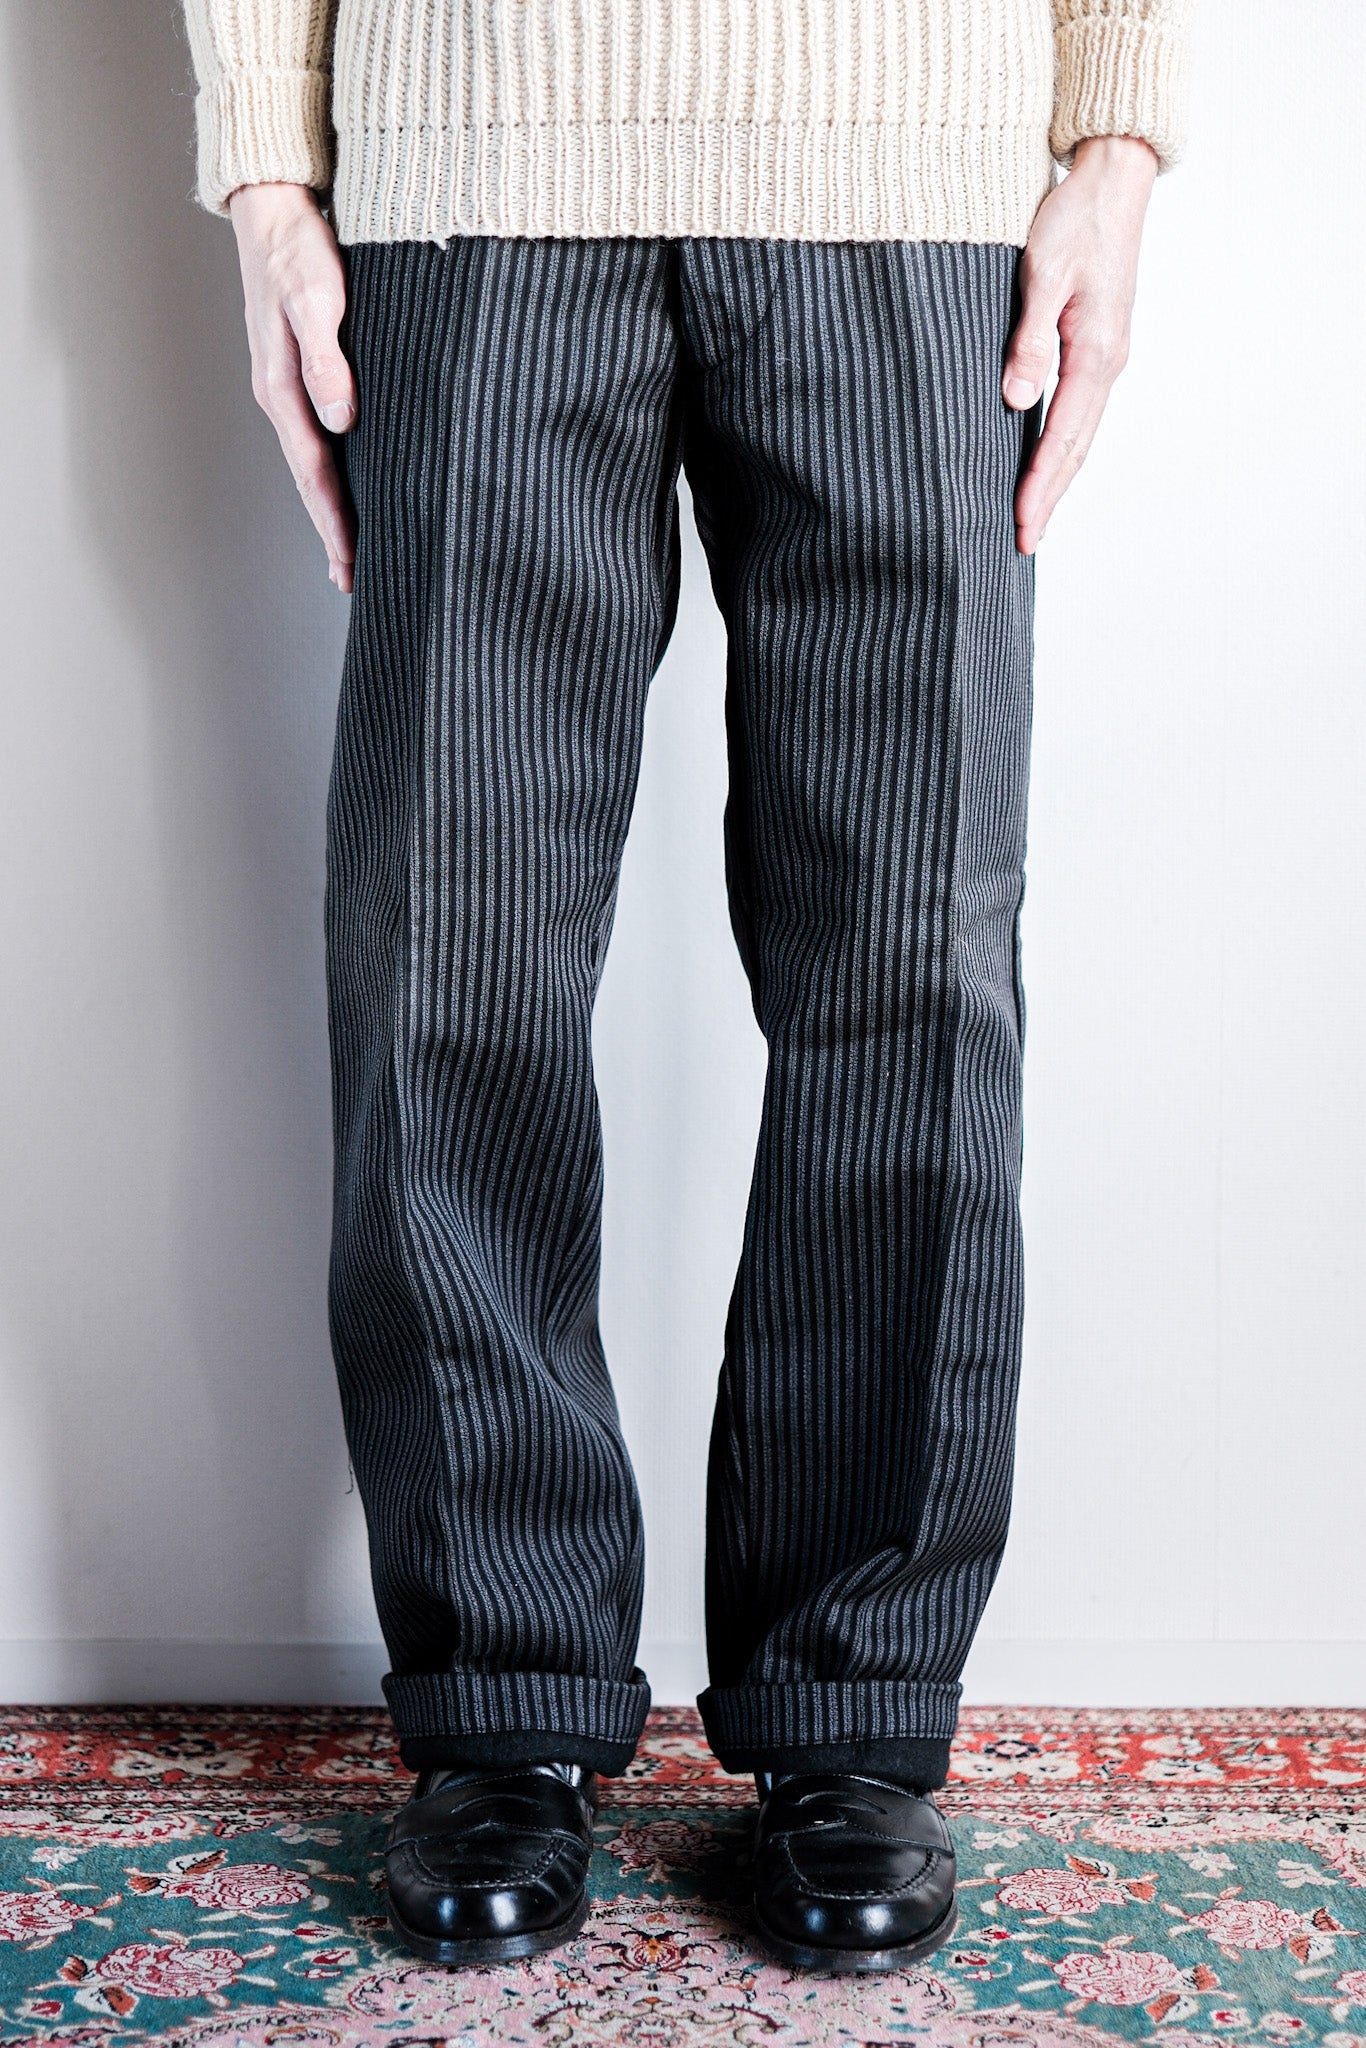 【~50's】French Vintage Cotton Striped Work Pants "Dead Stock"